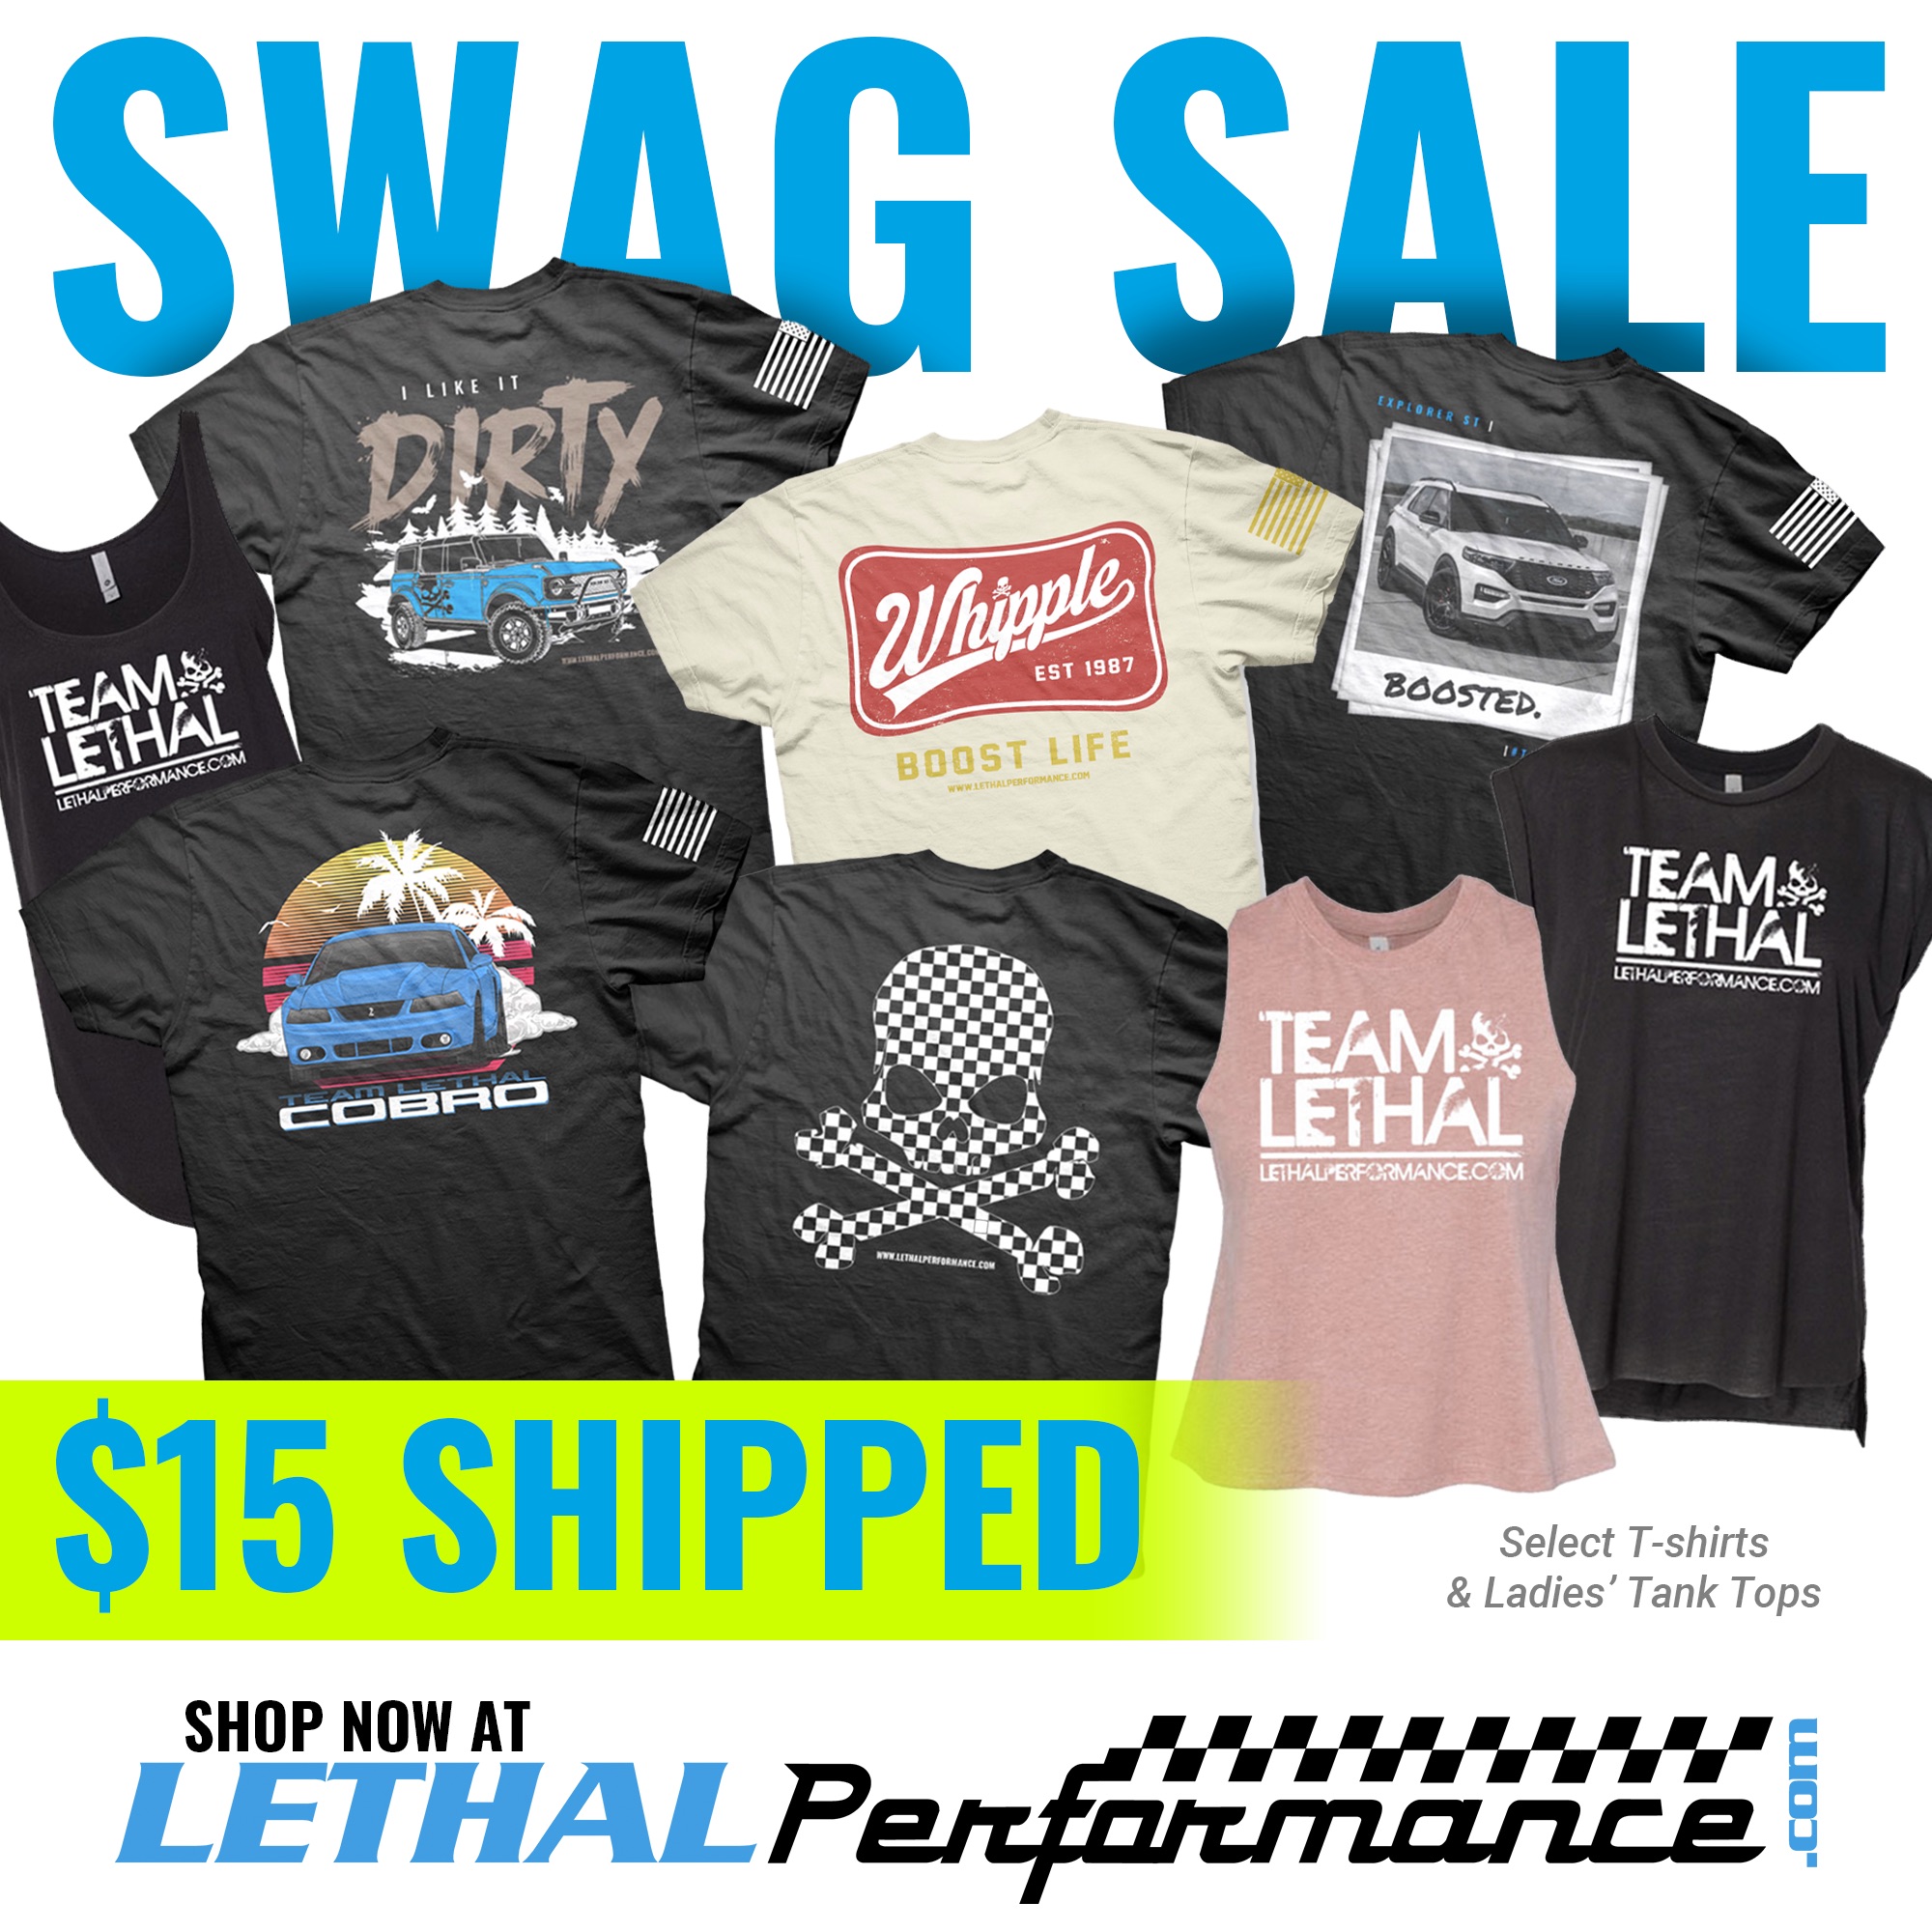 S650 Mustang Lethal Performance SWAG SALE!! SWAGSALE